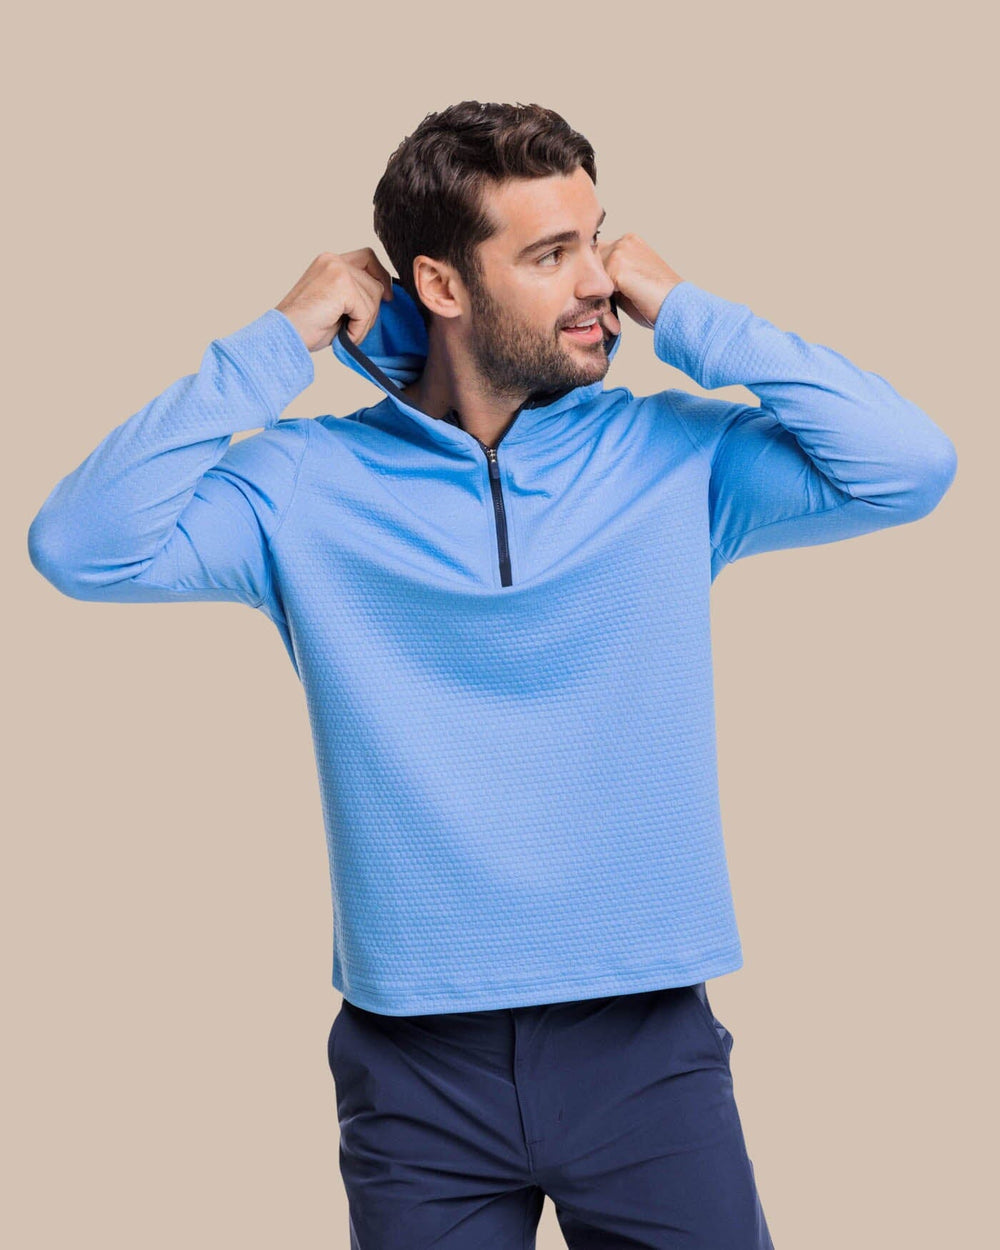 The front hood view of the Southern Tide Scuttle Heather Performance Quarter Zip Hoodie by Southern Tide - Heather Boat Blue